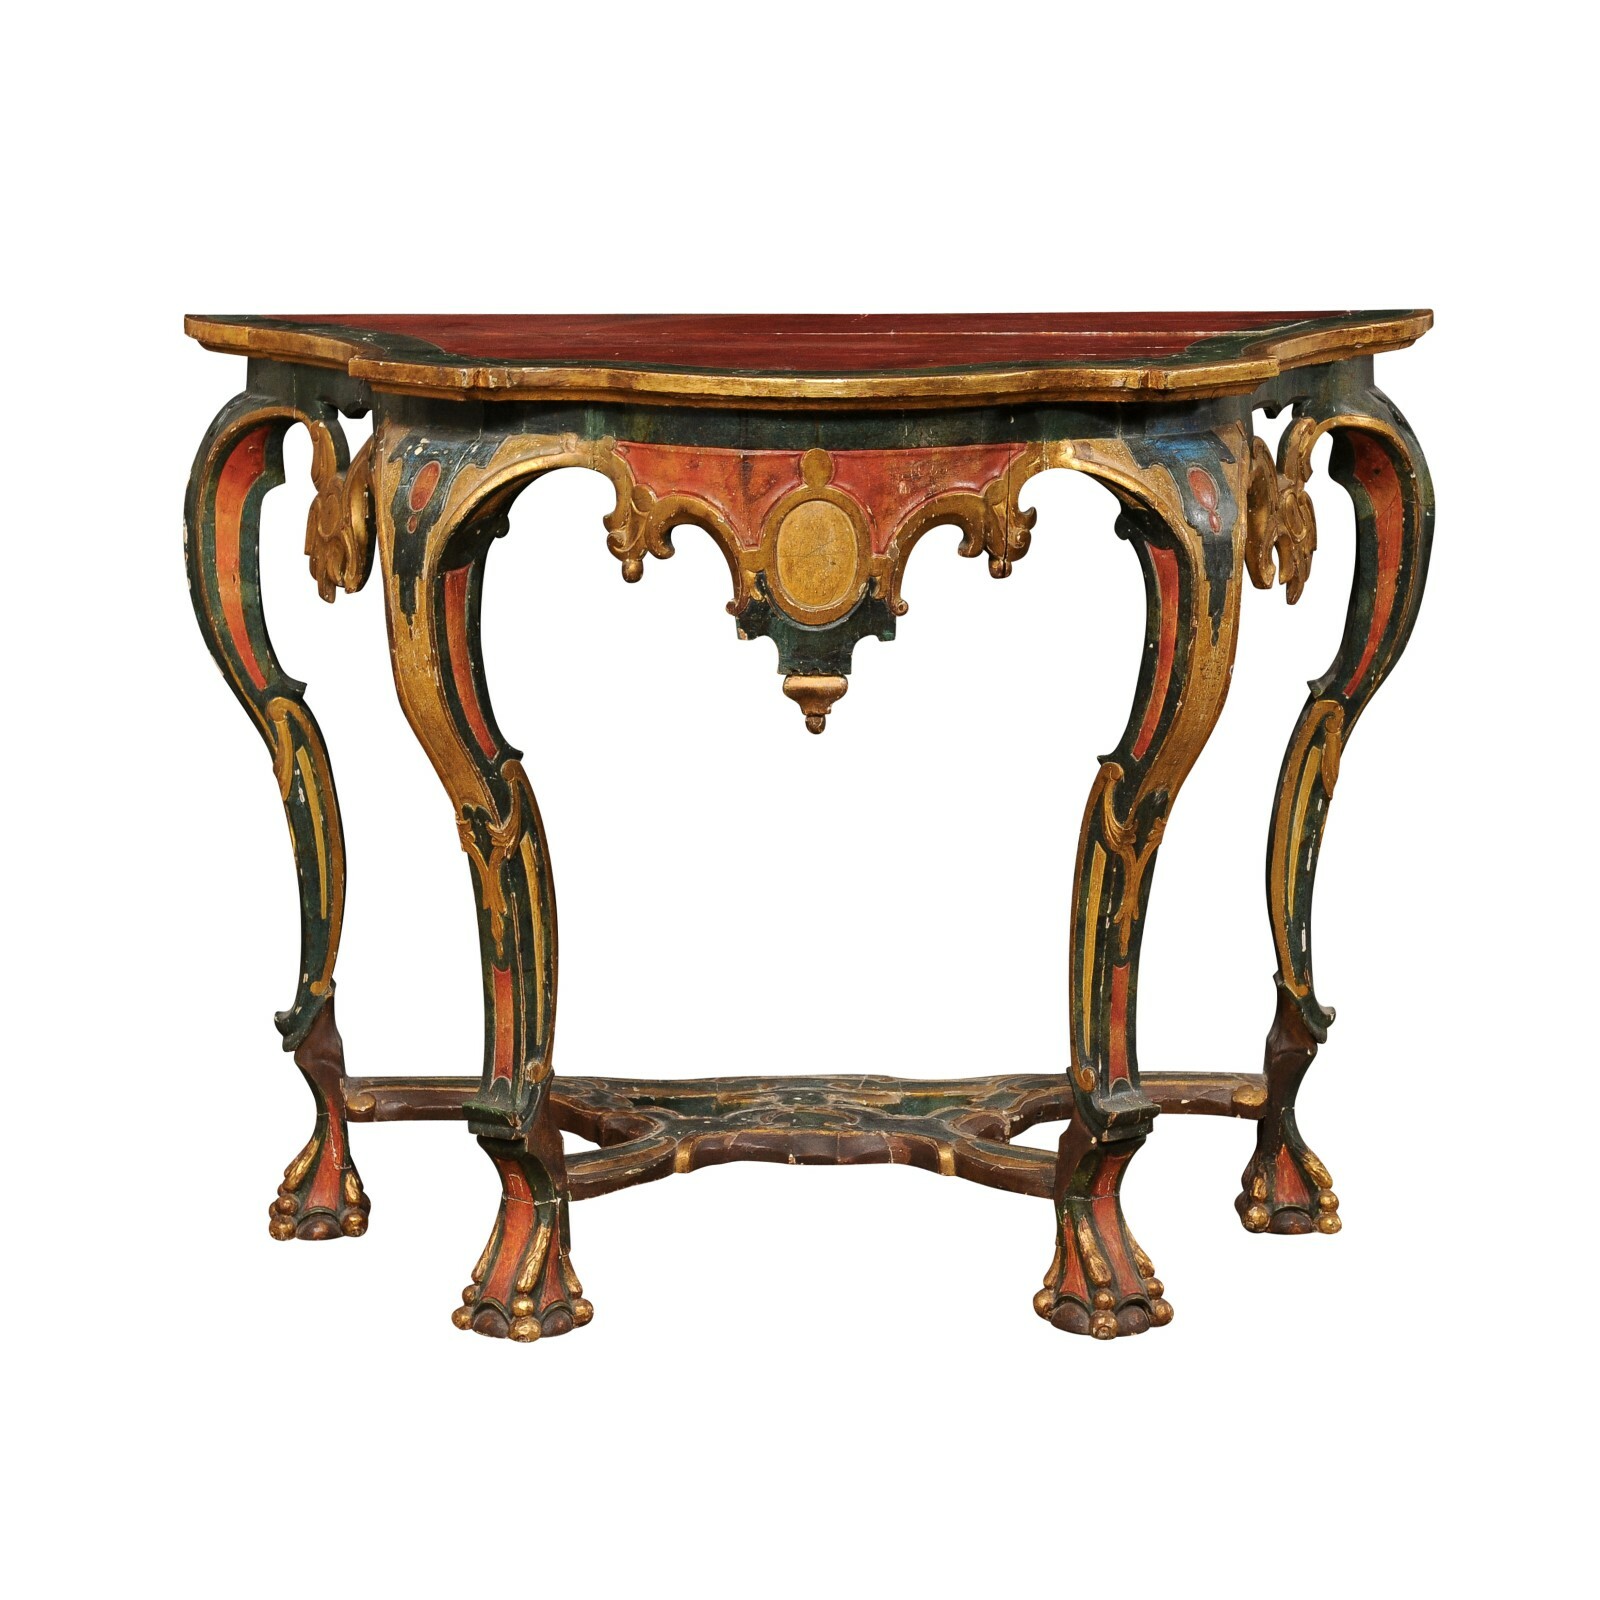 Portuguese Carved-Wood Console, Late 18th C